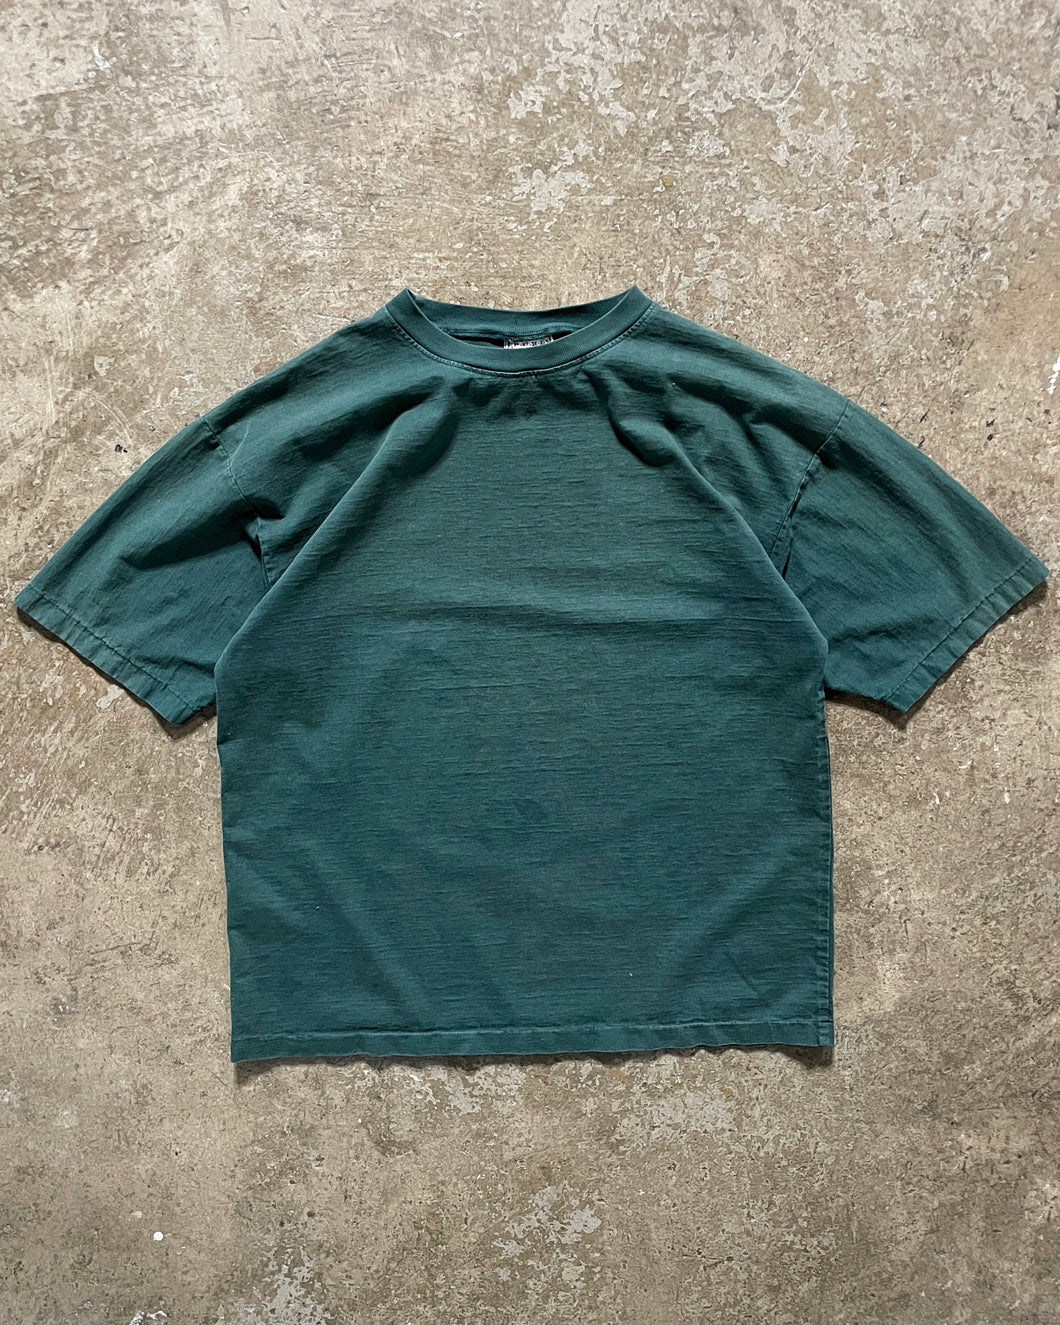 SINGLE STITCHED FADED FOREST GREEN HEAVYWEIGHT TEE - 1990S